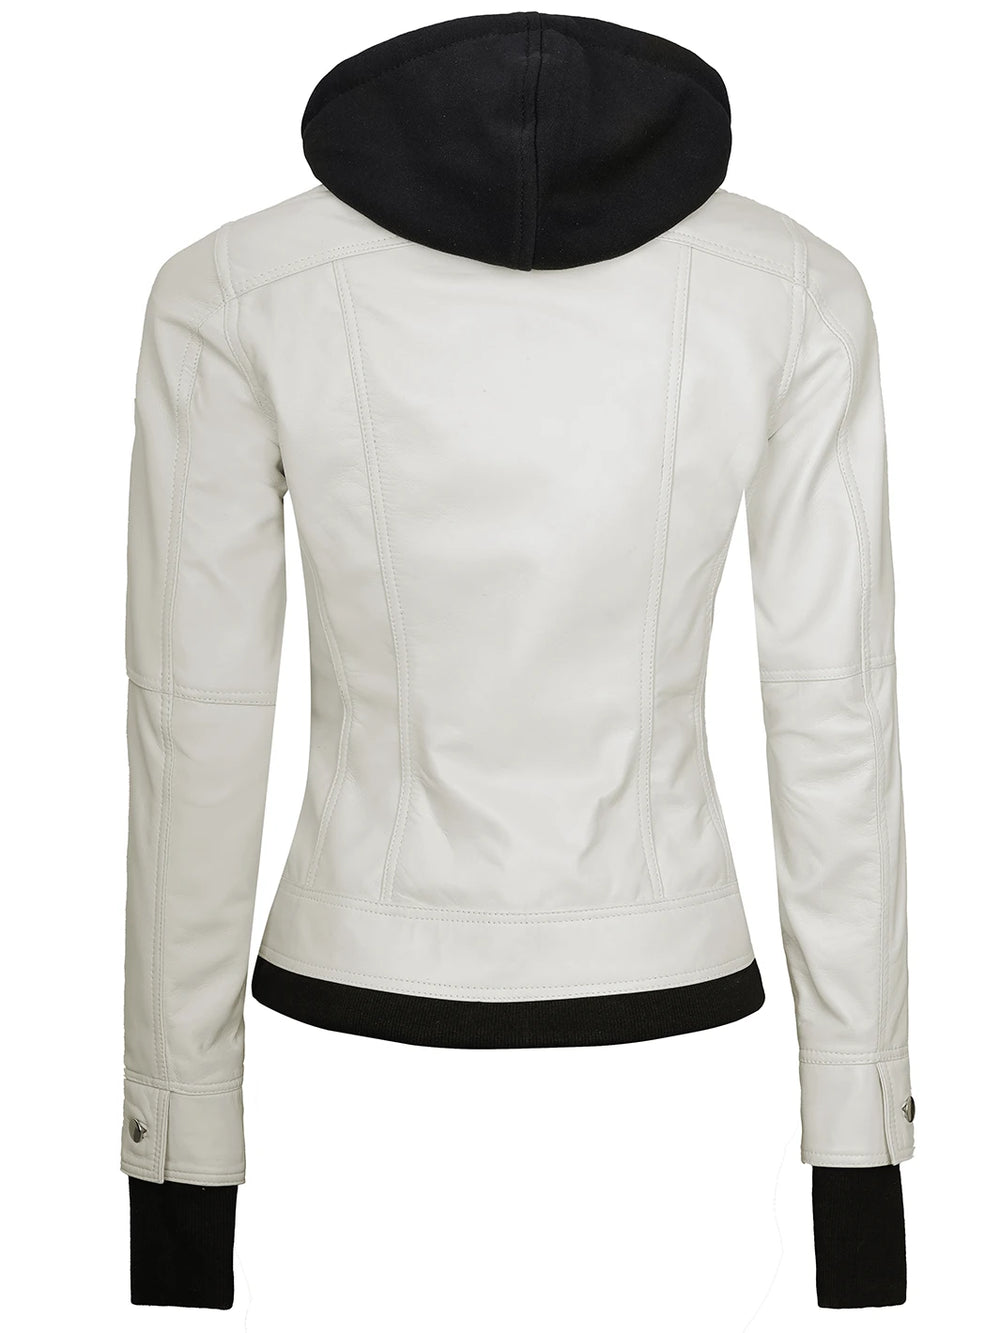 Women off white leather jacket hooded